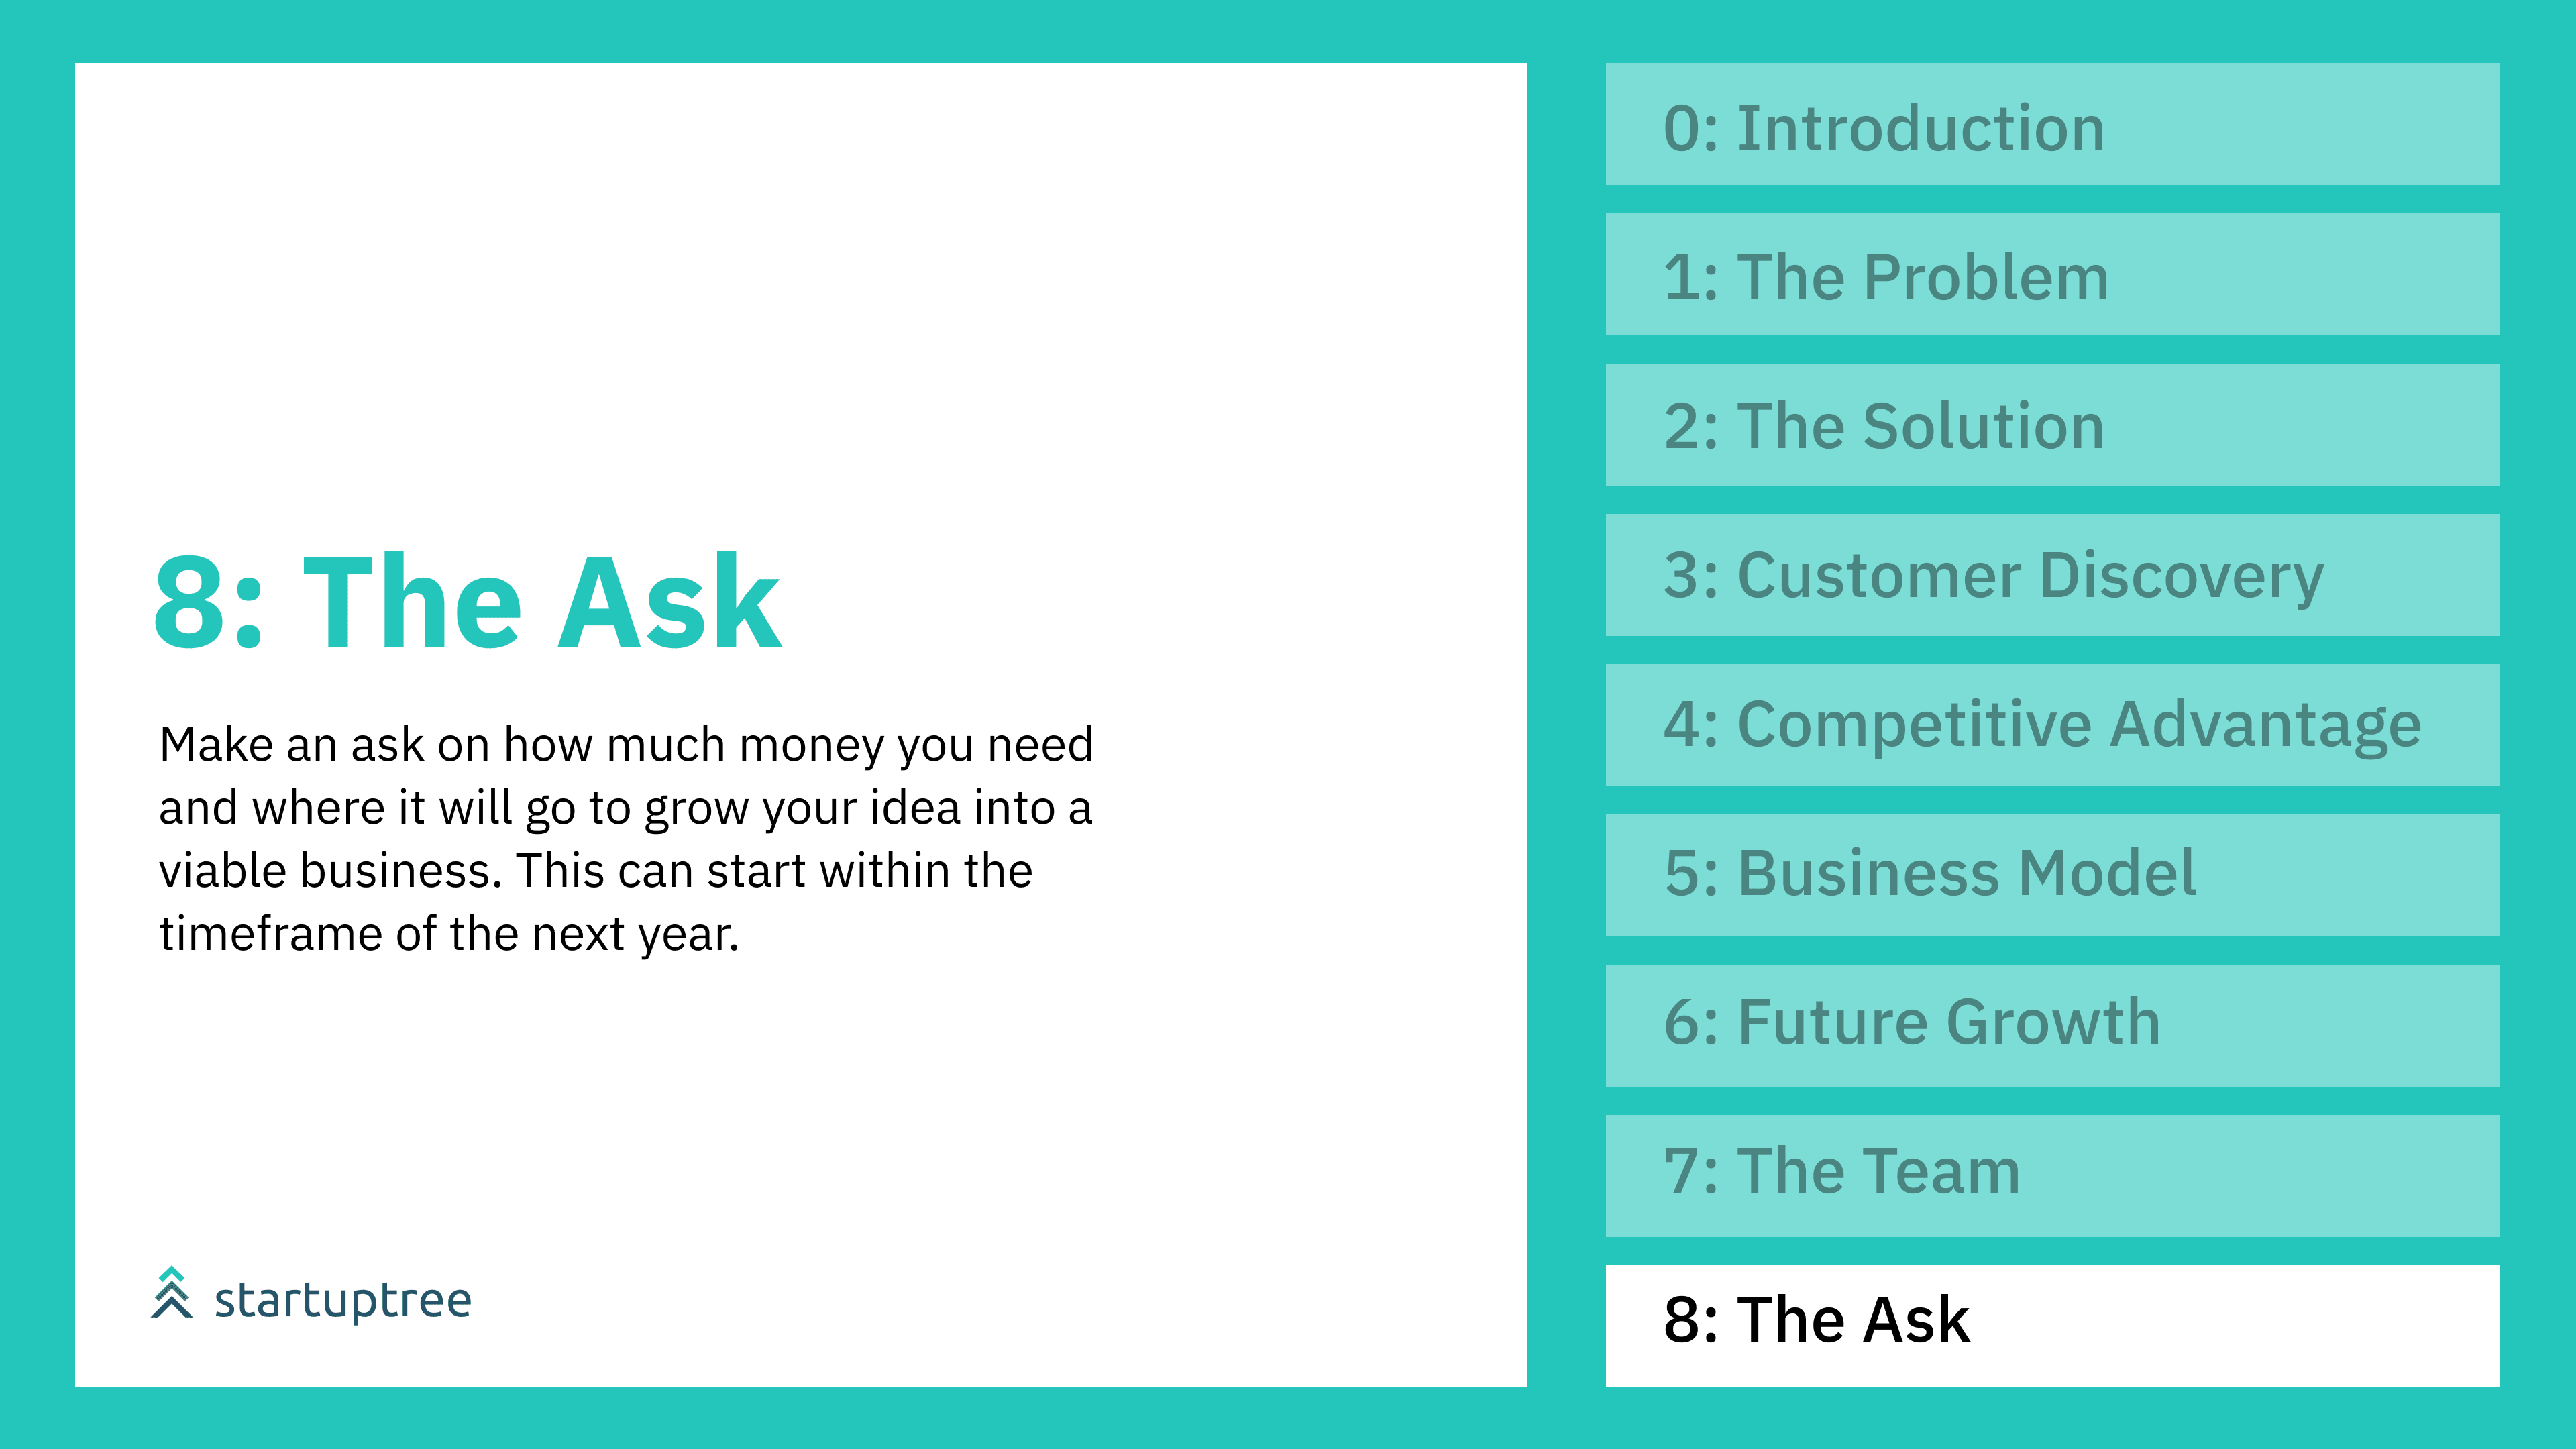 how long should a pitch deck presentation be